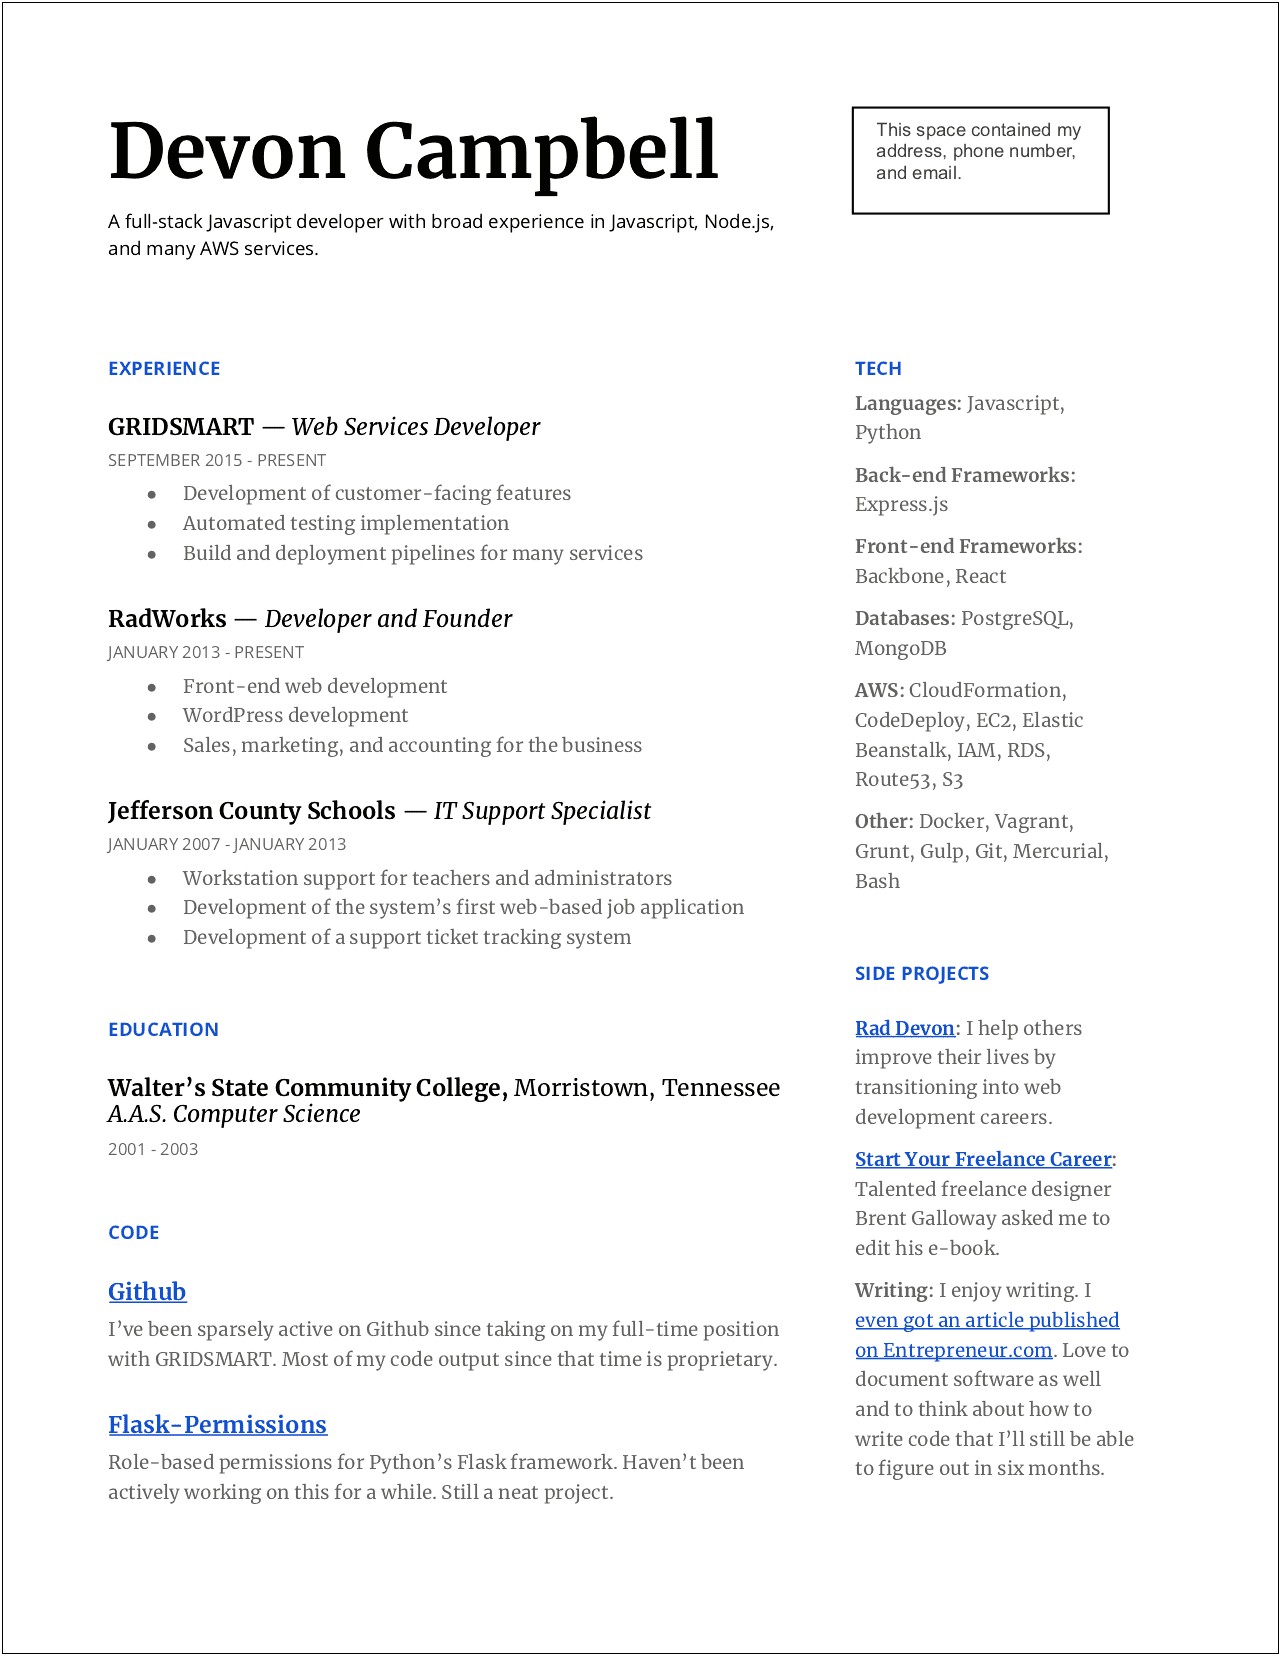 Can You Put Current Project In Your Resume